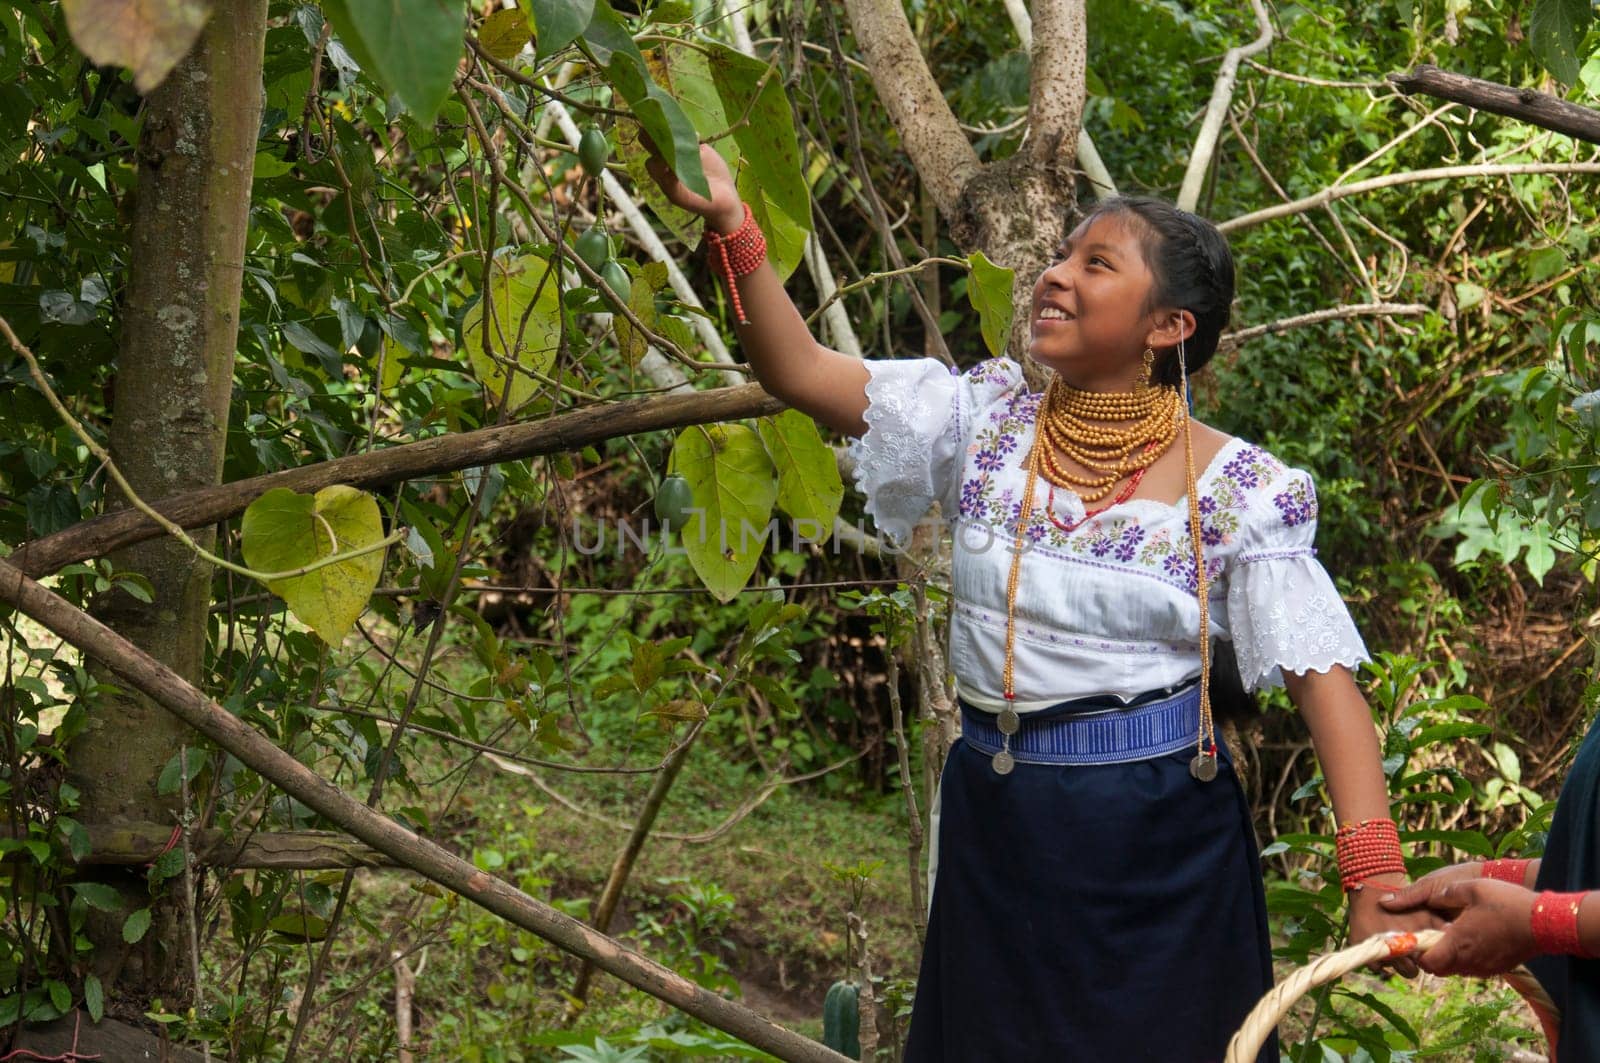 Ecuadorian Joy: A Young Gal in Traditional Attire Pickin' Wild Fruits with a Smile in the Jungle. High quality photo